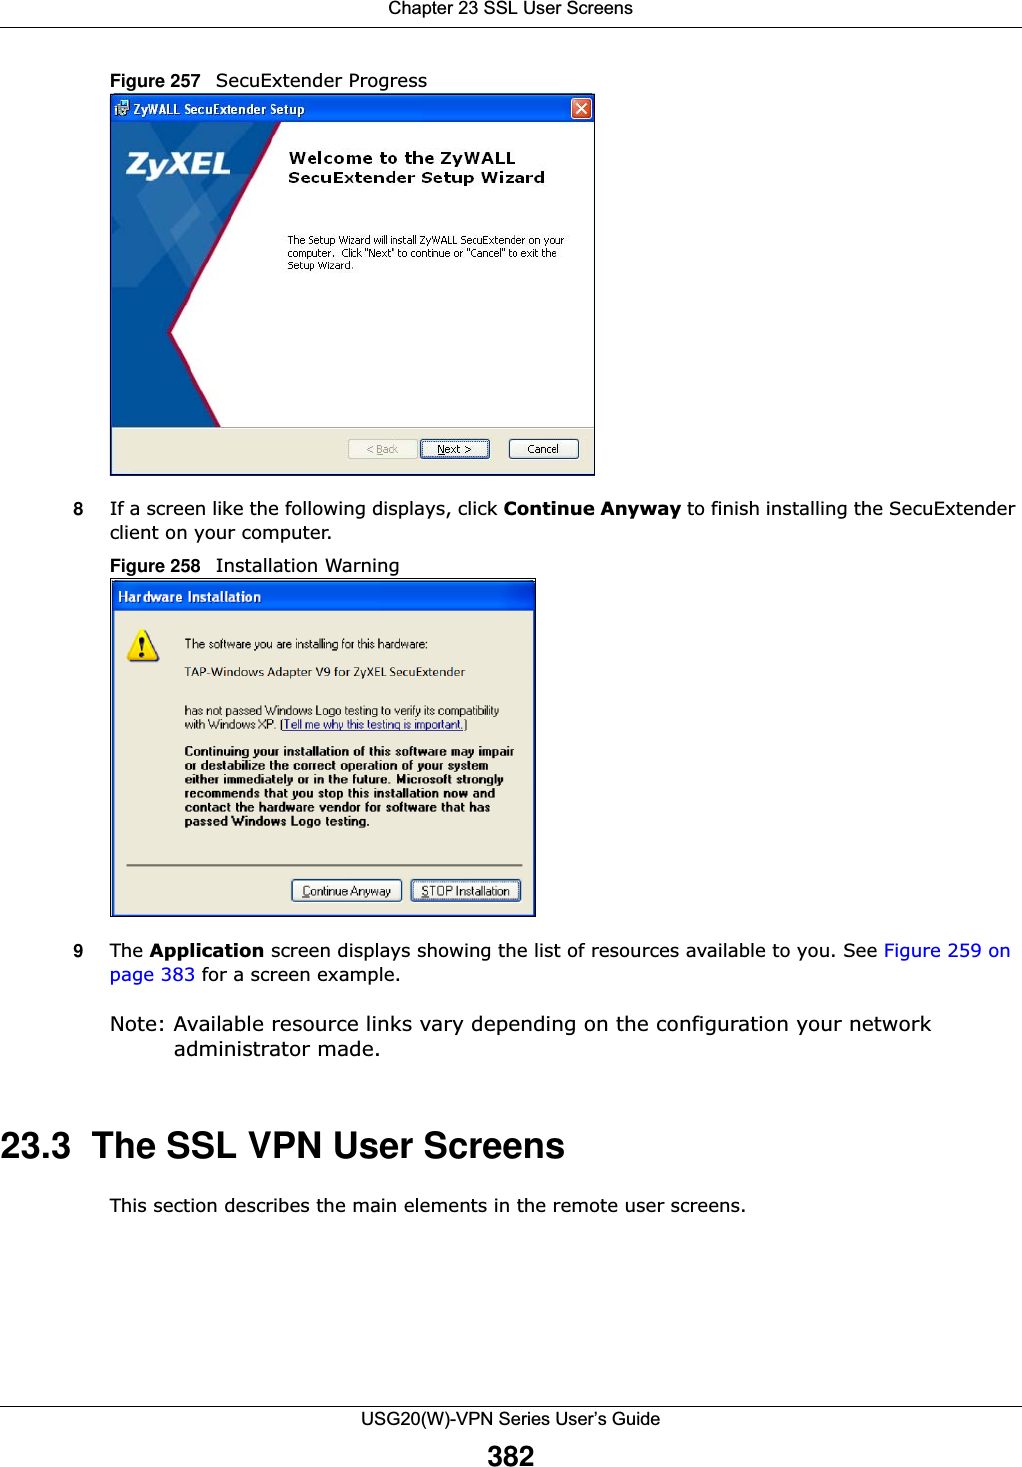 Chapter 23 SSL User ScreensUSG20(W)-VPN Series User’s Guide382Figure 257   SecuExtender Progress   8If a screen like the following displays, click Continue Anyway to finish installing the SecuExtender client on your computer.Figure 258   Installation Warning   9The Application screen displays showing the list of resources available to you. See Figure 259 on page 383 for a screen example. Note: Available resource links vary depending on the configuration your network administrator made. 23.3  The SSL VPN User ScreensThis section describes the main elements in the remote user screens. 